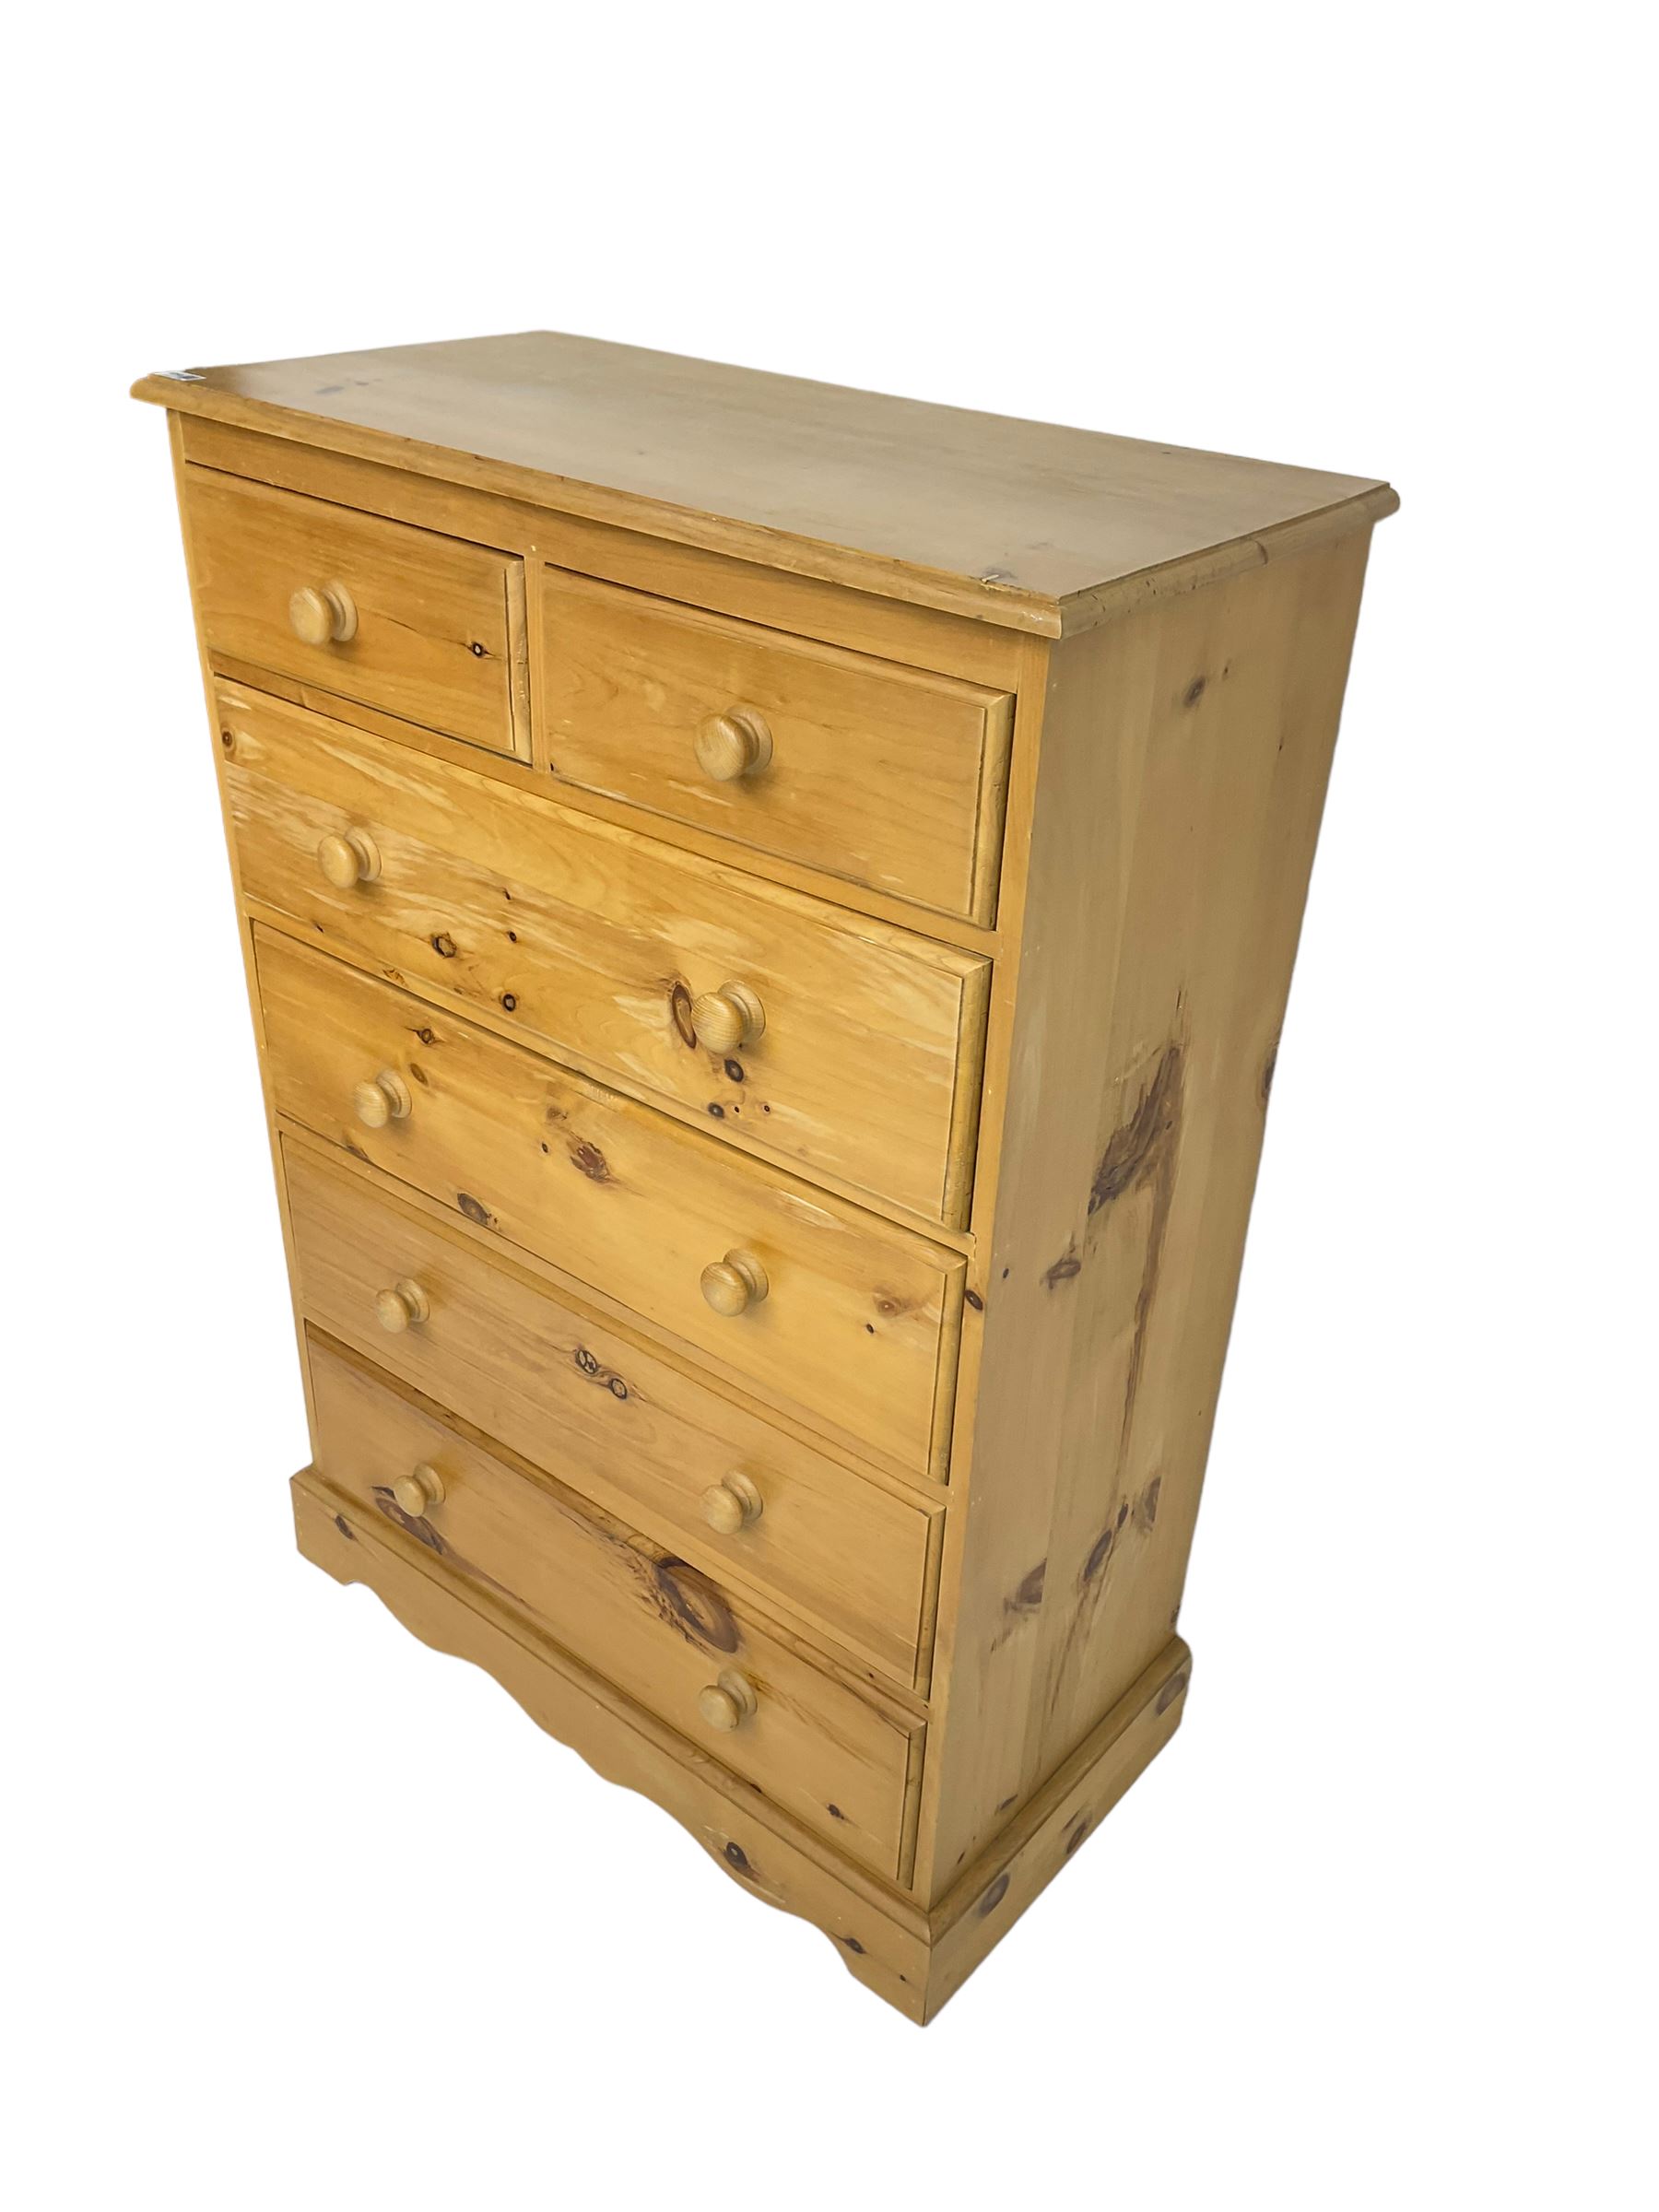 Traditional pine chest - Image 2 of 7